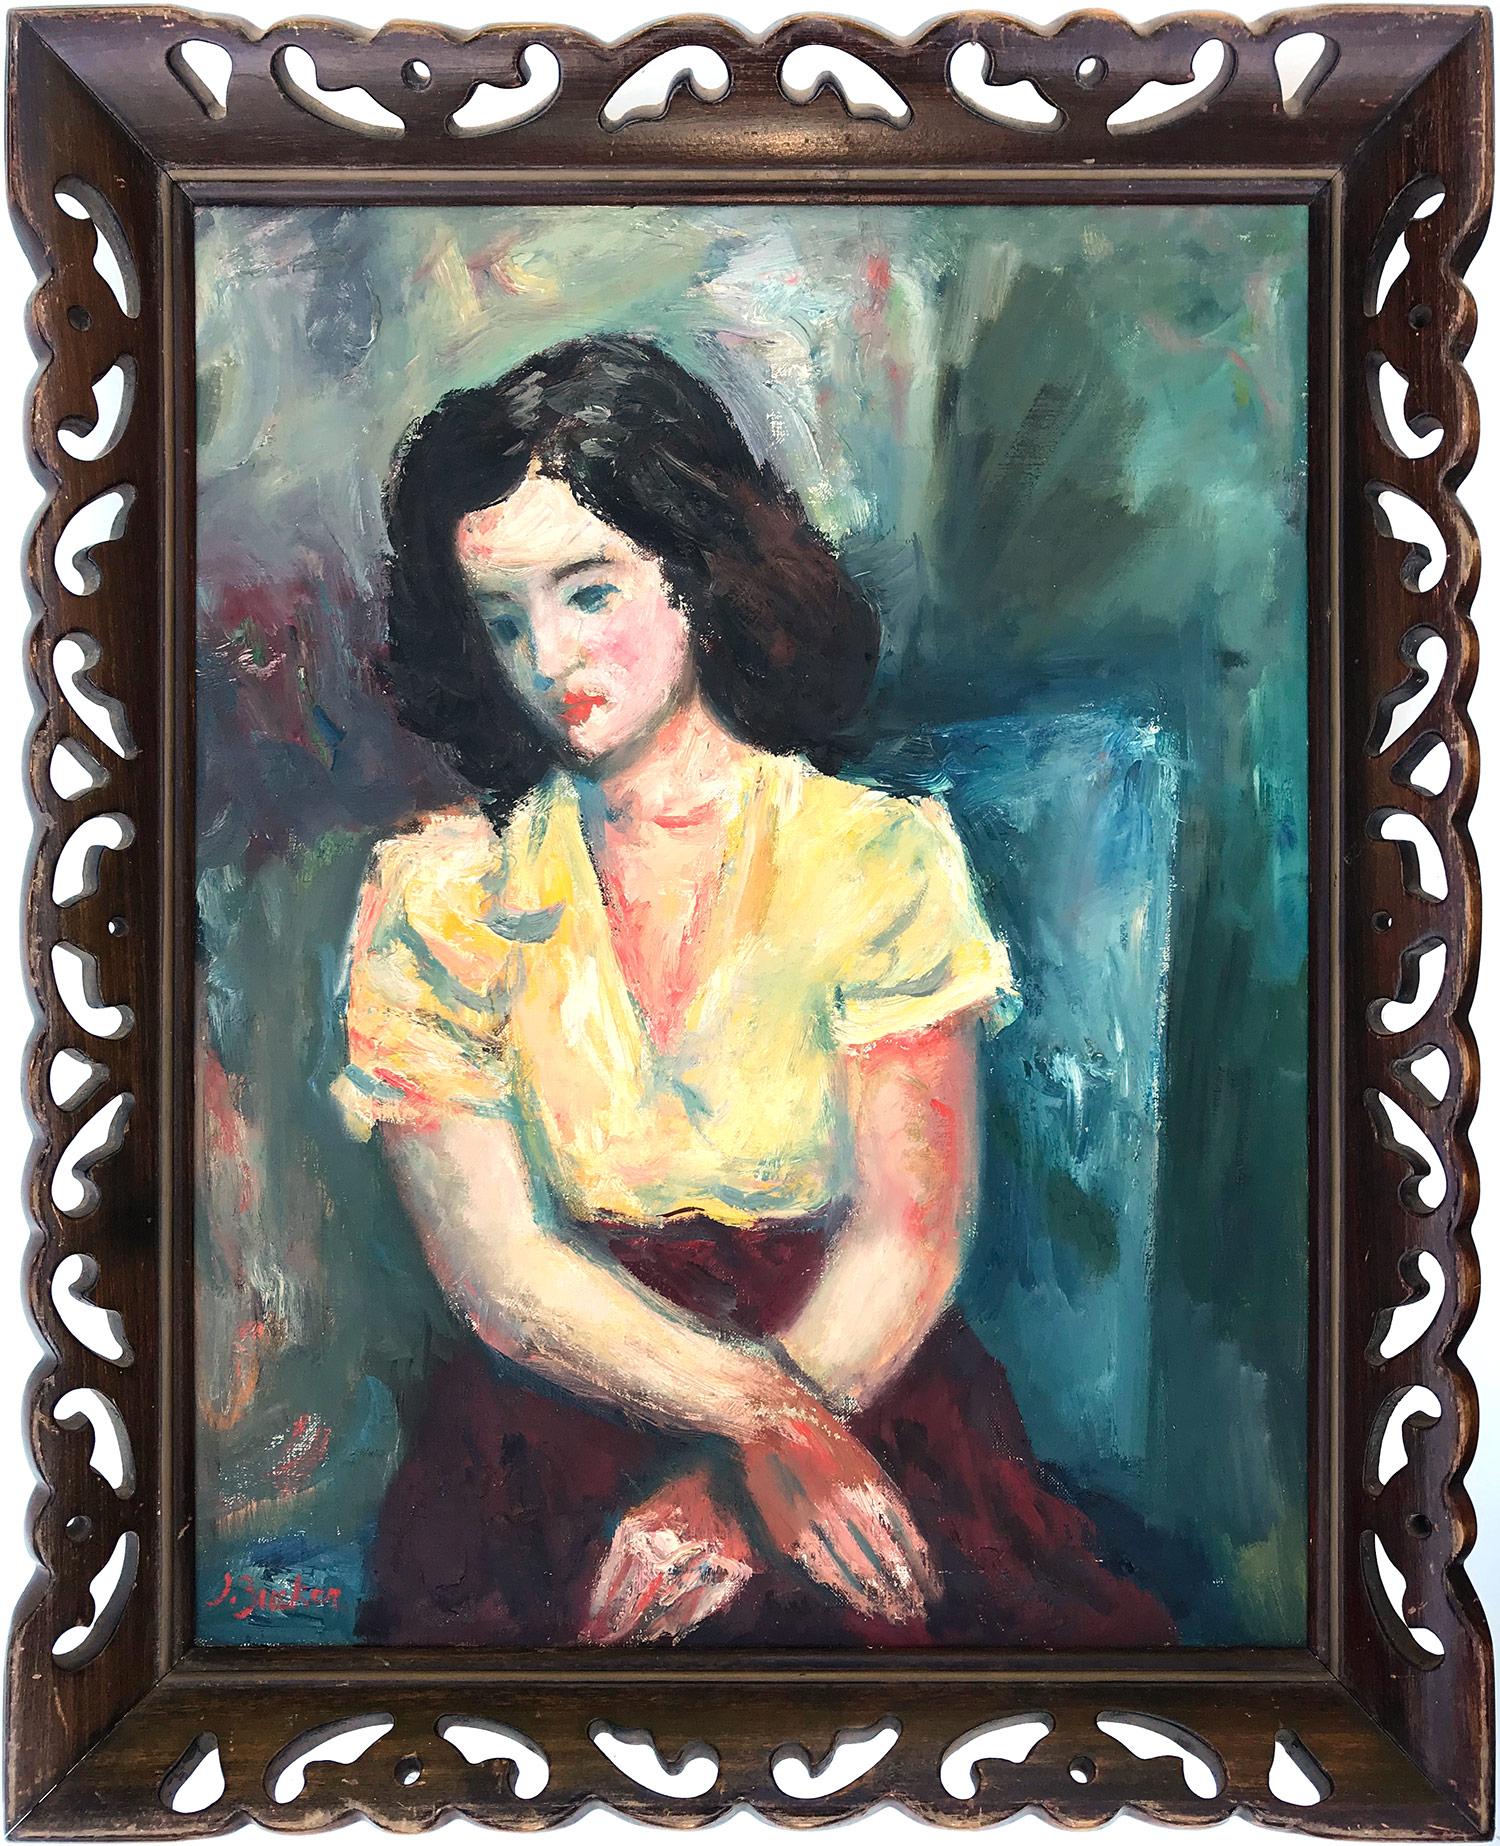 Jacques Zucker Portrait Painting - "Portrait of a Woman in Yellow Blouse" Post-Impressionism Oil Painting on Canvas